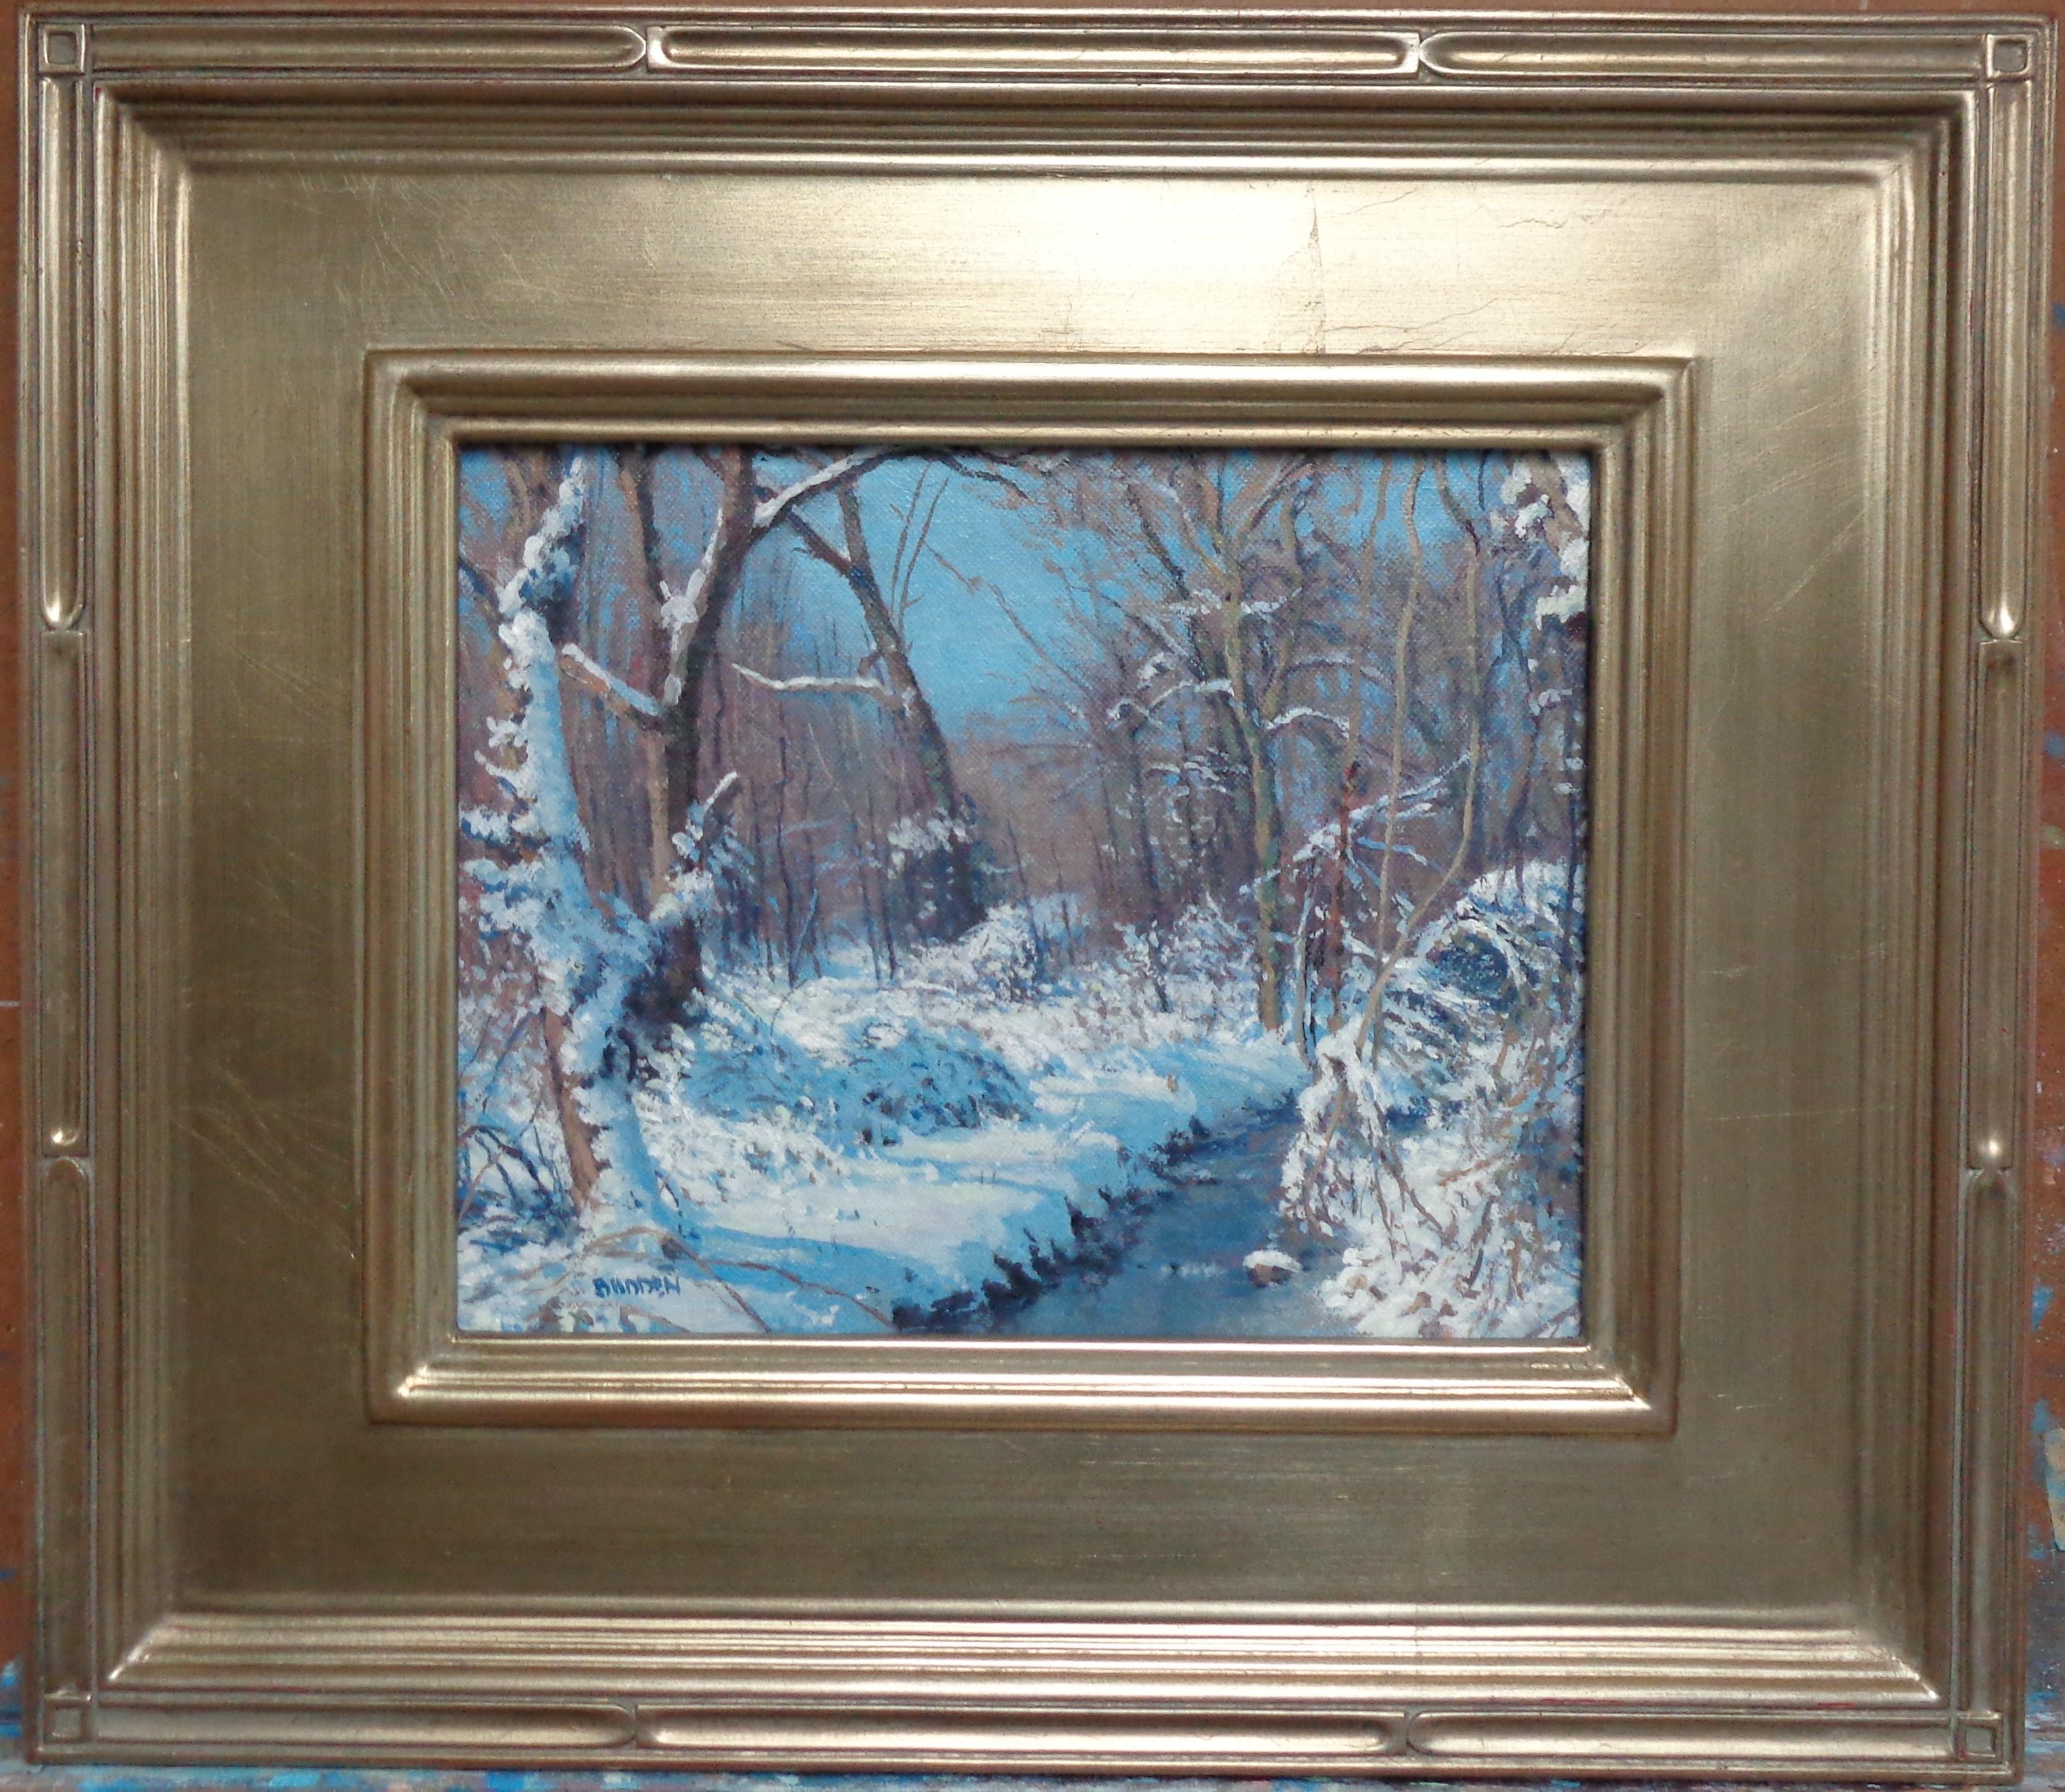 Fresh Snow
oil/canvas panel
8 x 10 image unframed
14.5 x 16.5 framed
I enjoy playing with light in my paintings and creating a mood while trying to push the range of color using subtle transitions like in the snow here in this winter study done in